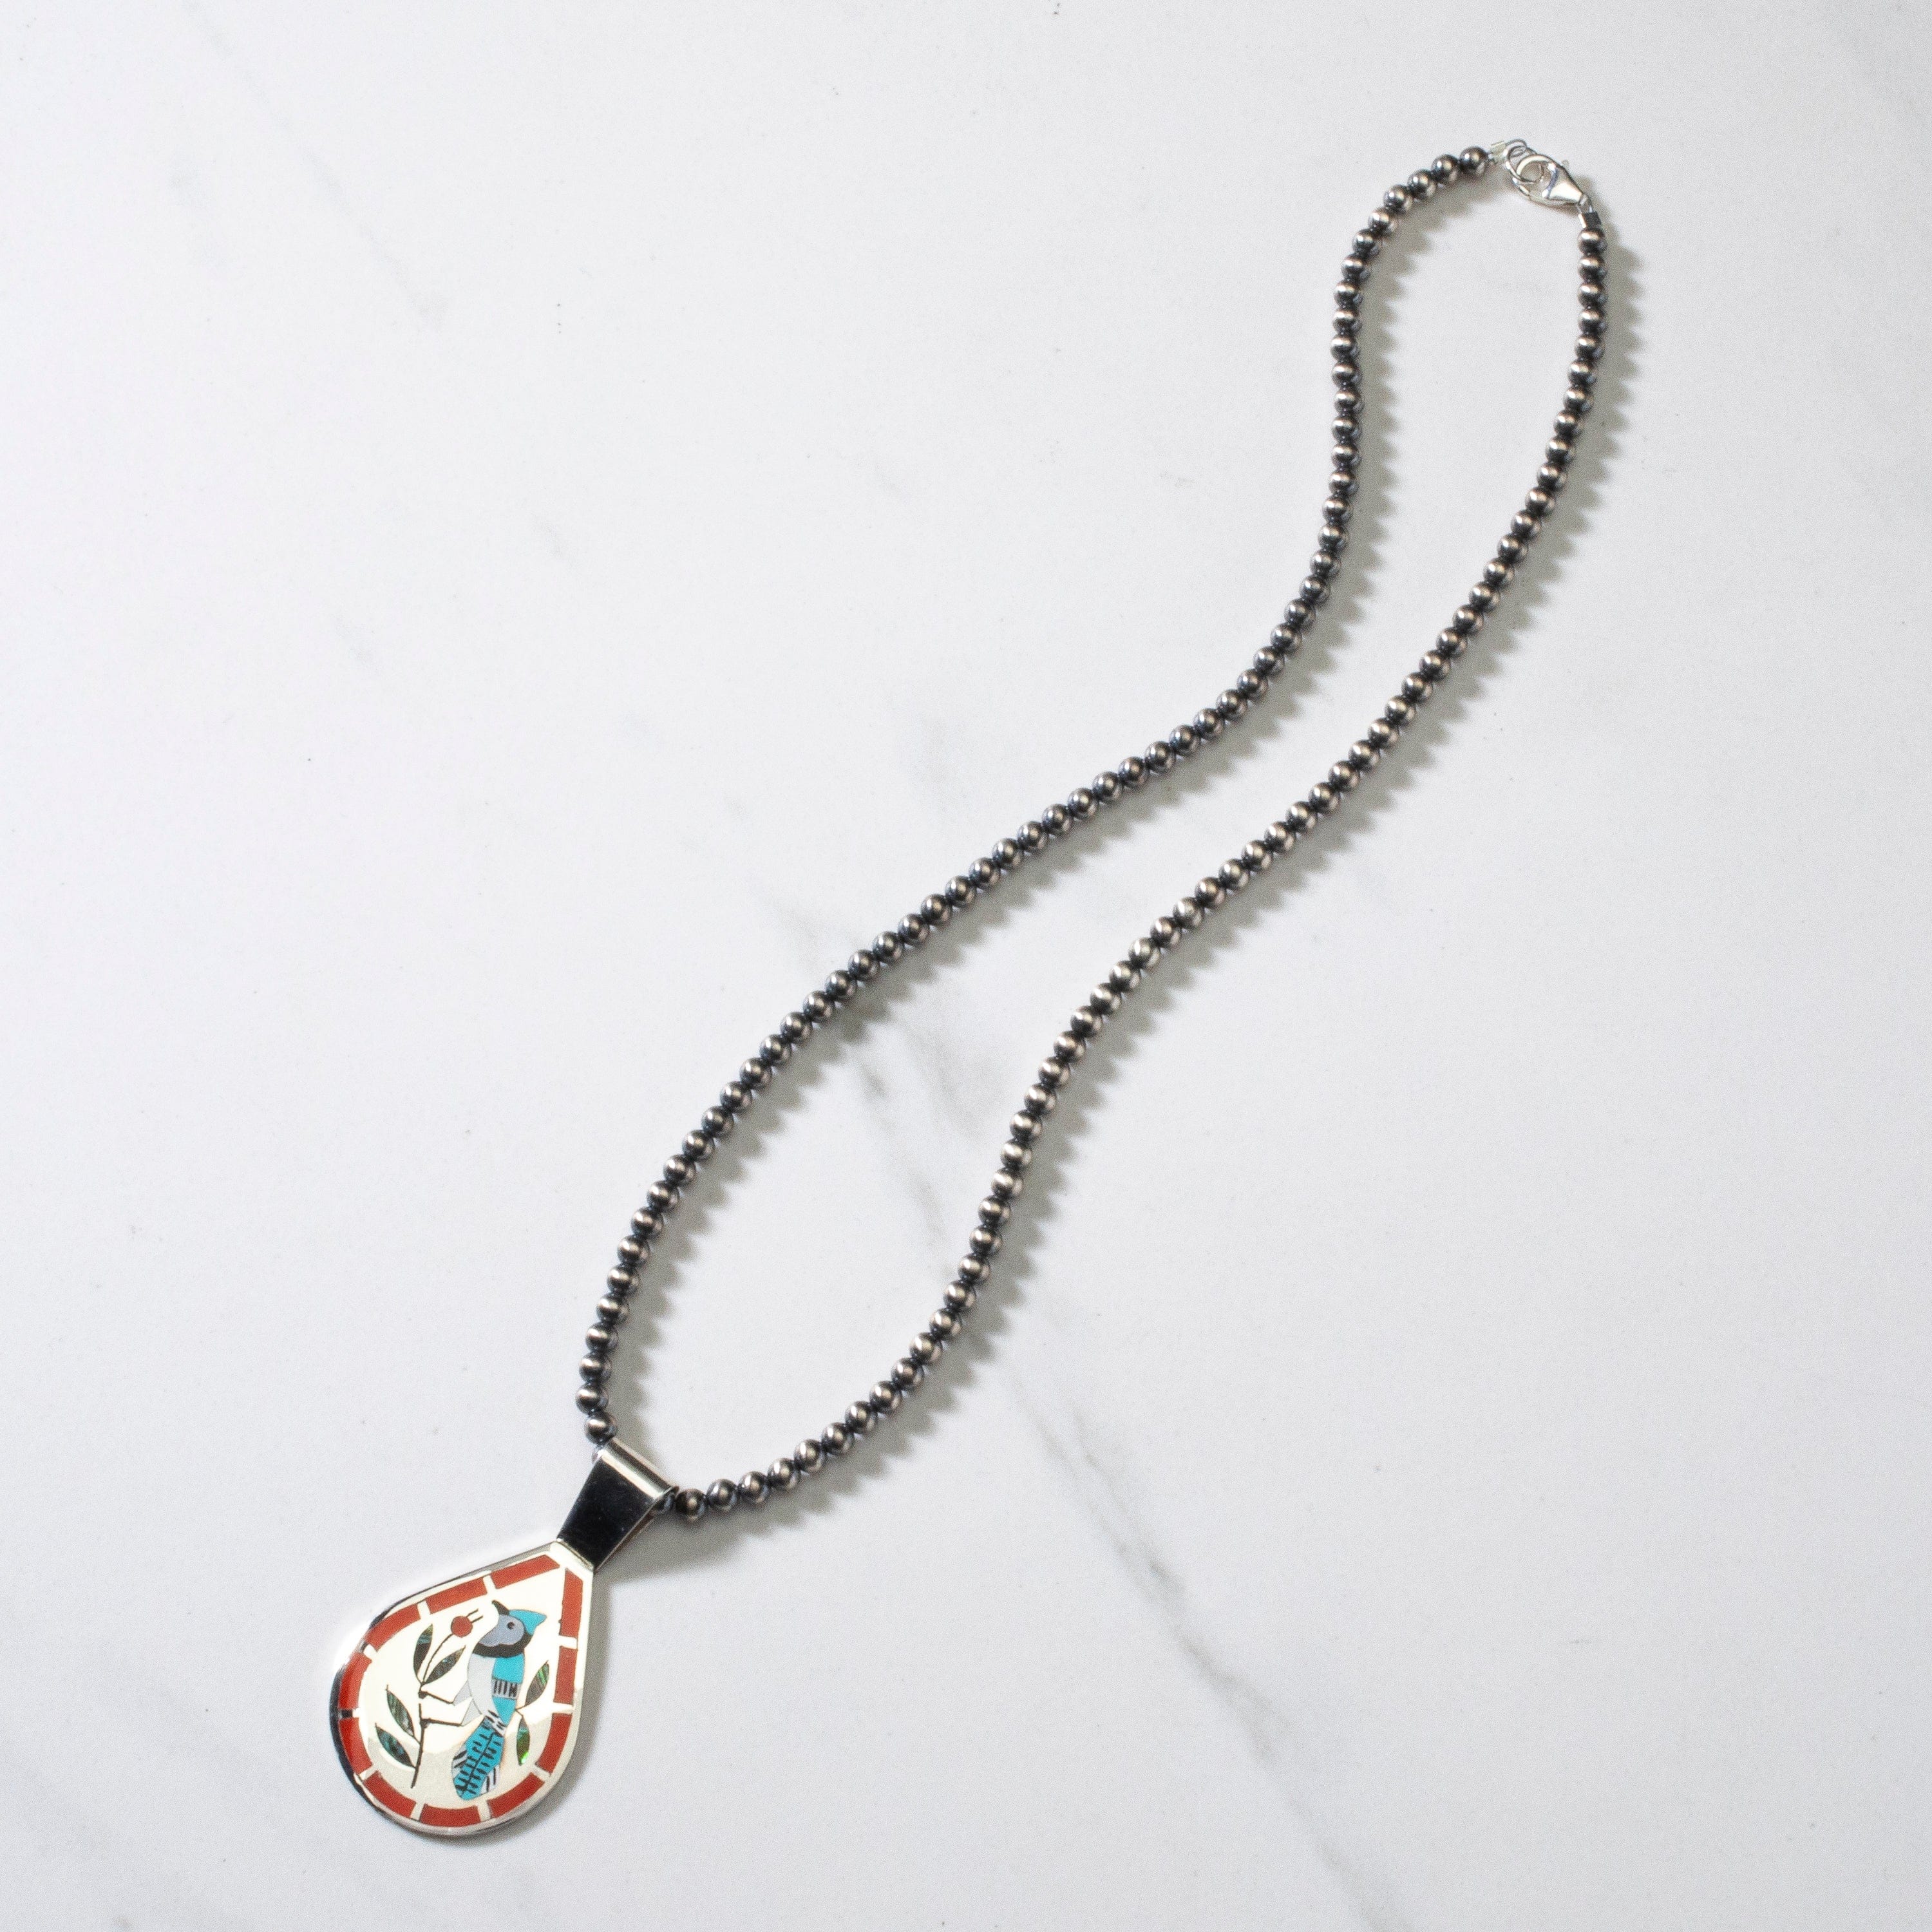 Kalifano Native American Jewelry 18" Dennis & Nancy Edaakie Mutli Gem Blue Jay Zuni Inlay Pendant with 4mm Navajo Pearl Necklace USA Native American Made 925 Sterling Silver NAN1500.014